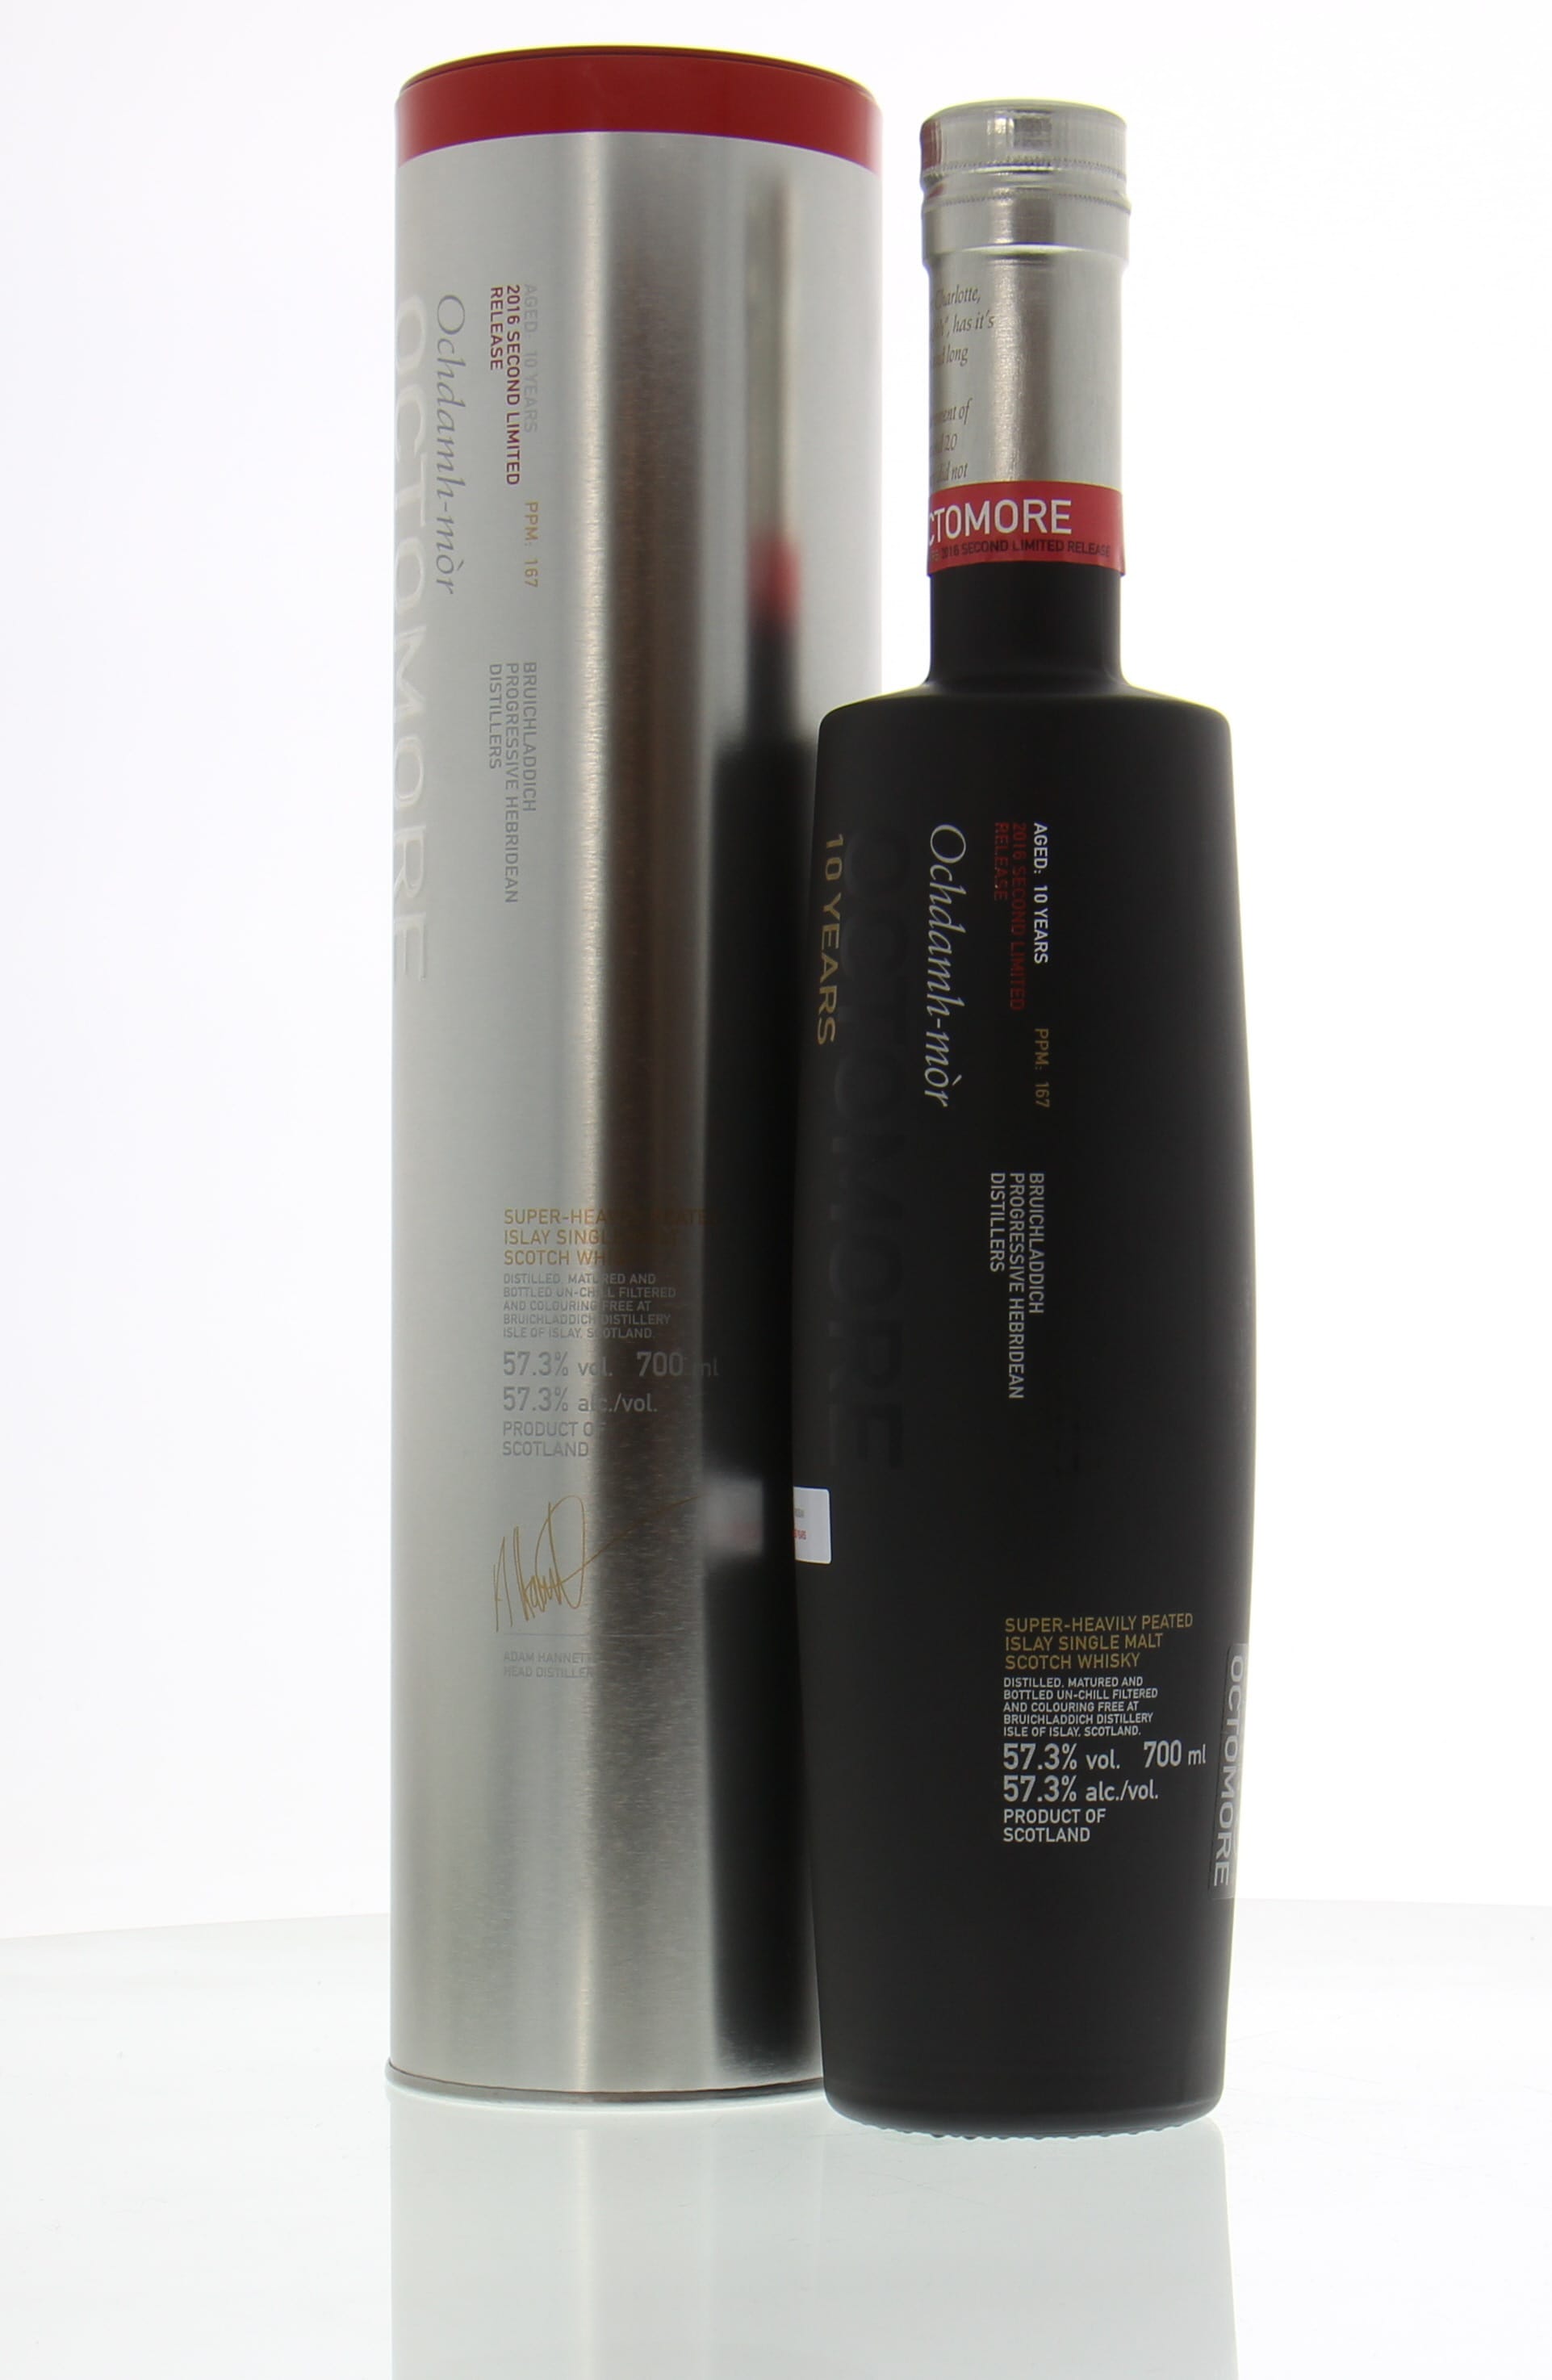 Bruichladdich - 10 Years Old Octomore 2016 Second Limited Release 57.3% NV